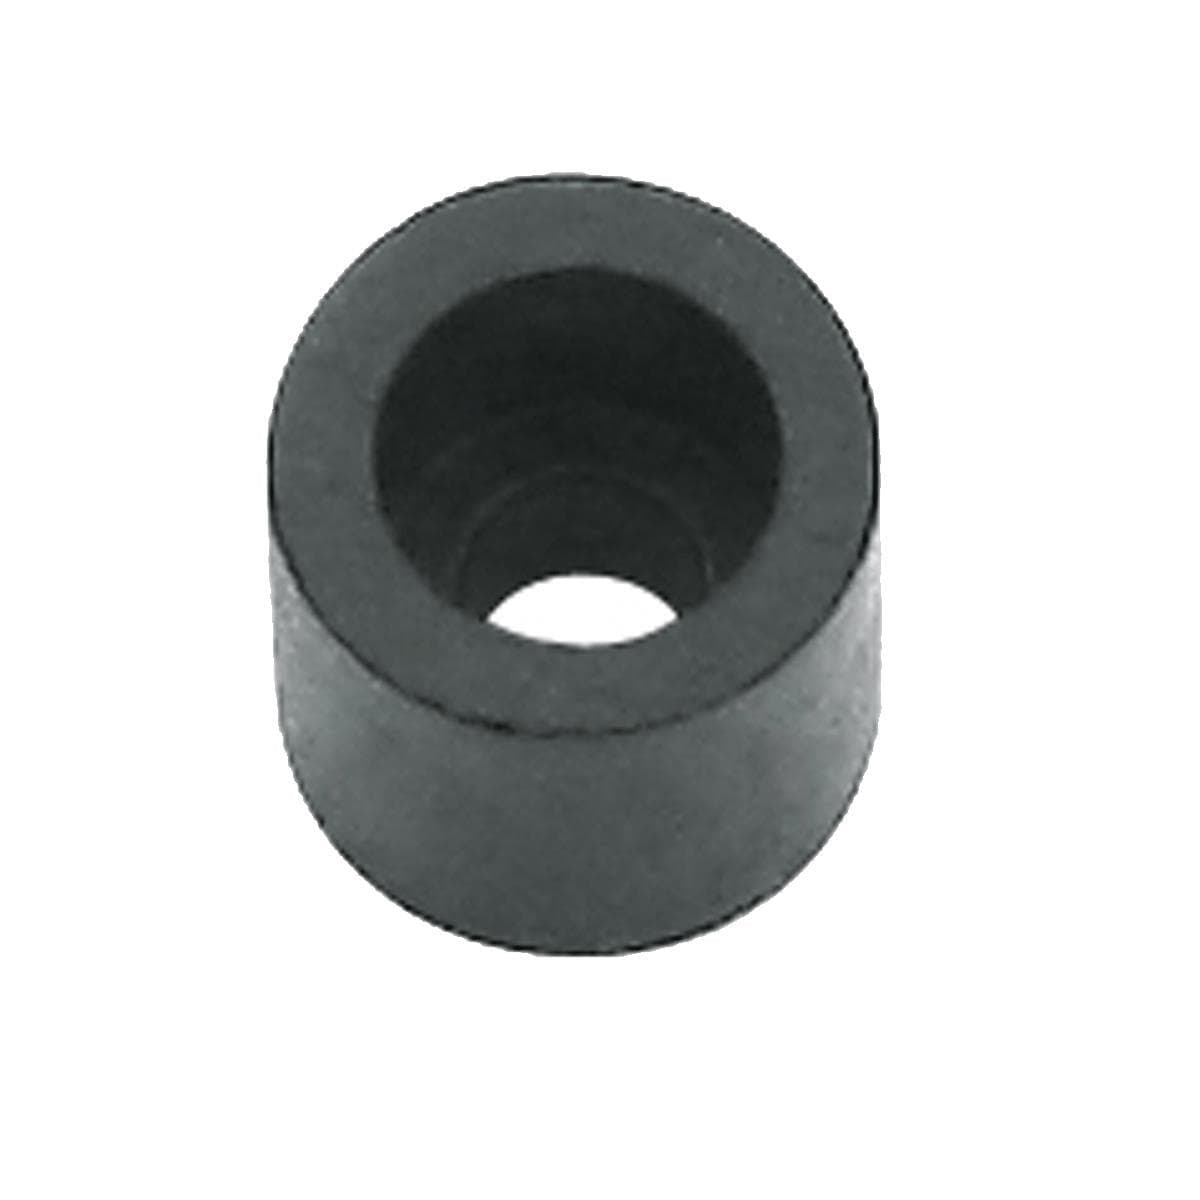 Sks Rubber Washer For Tl Lever Push-On Nipple X 10Pcs (3213 X 10):